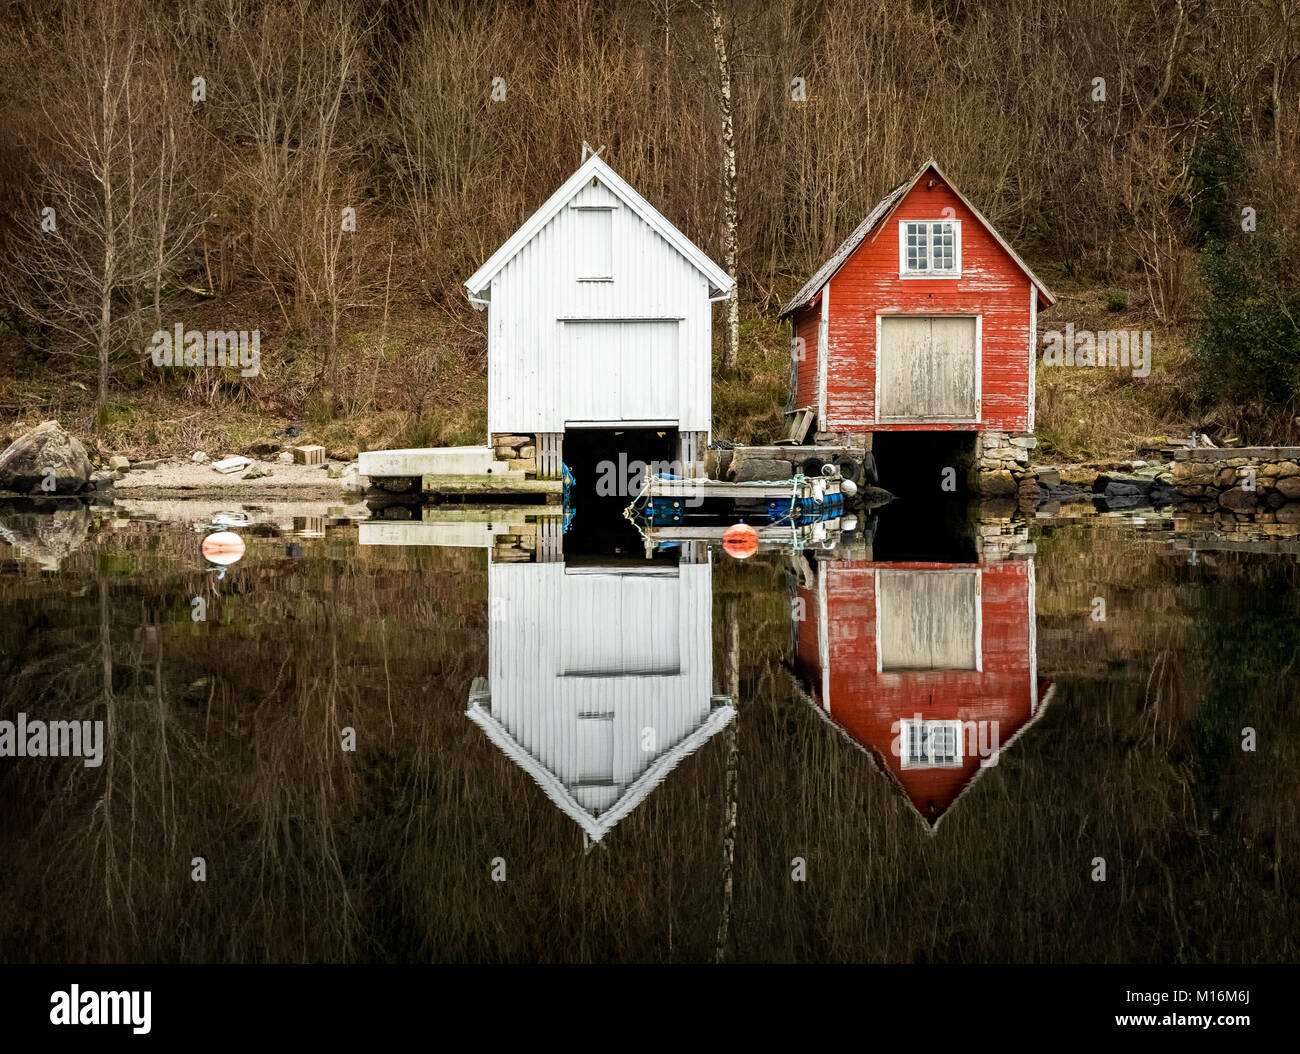 Kolnes in Norway - januray 10, 2018: Two old wooden boathouses reflected in the calm ocean. Norwegian west coast, Norway Stock Photo